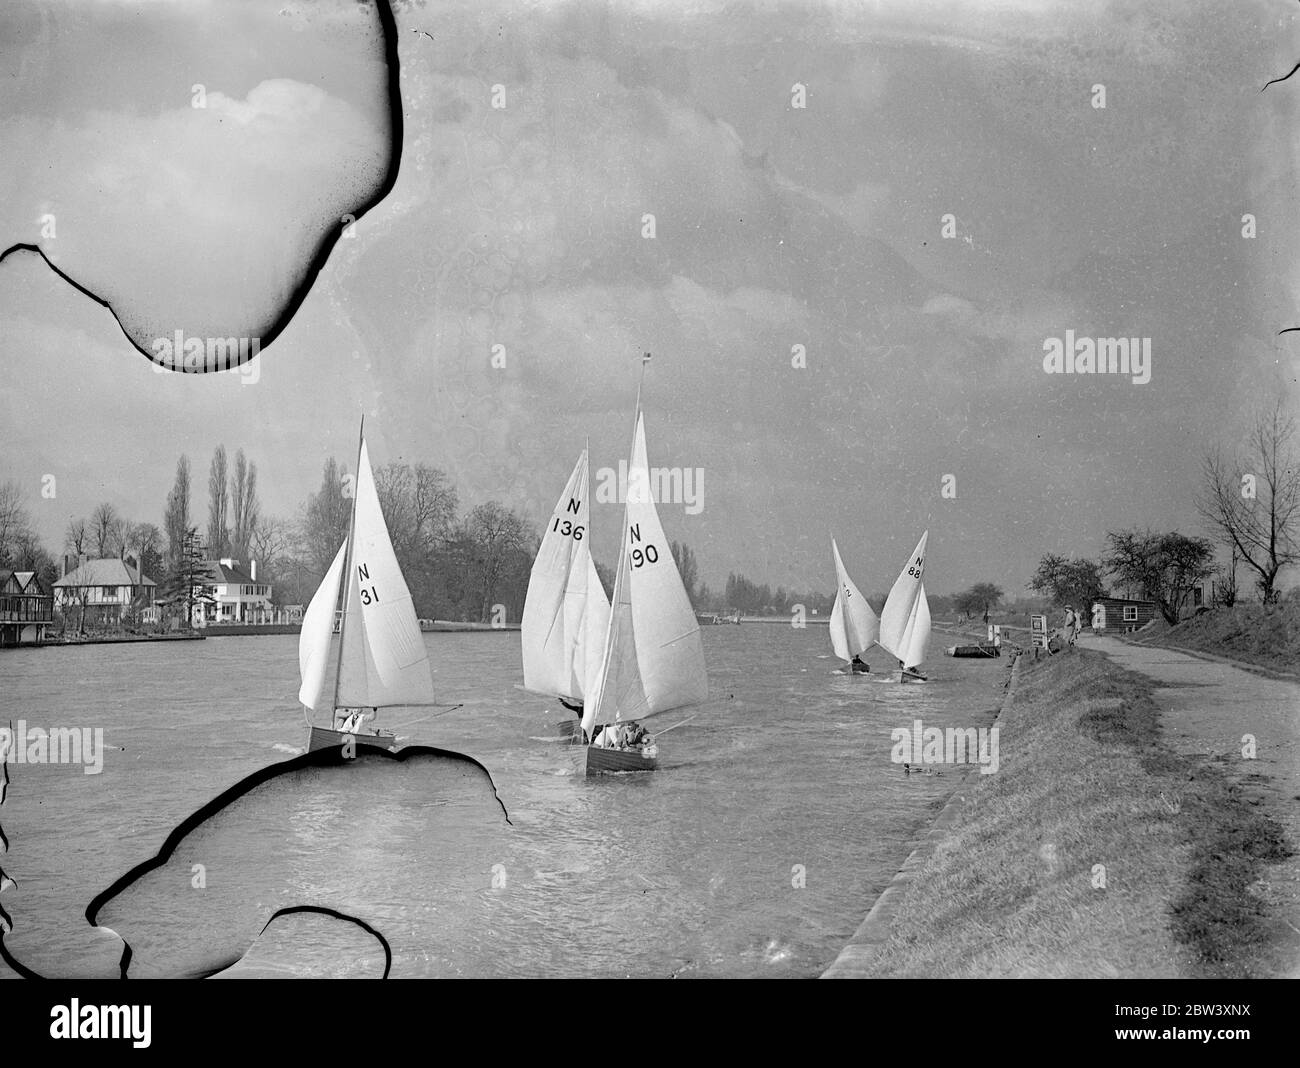 The Tamesis Sailing Club held an Easter Saturday yacht meeting at Teddington. A stiff breeze provides plenty of fuel for the sails and a ducking for some competitors. Photo shows: yachts make an attractive seascape for land bound Londoners as they scud before the breeze at Teddington 27th March 1937 Stock Photo